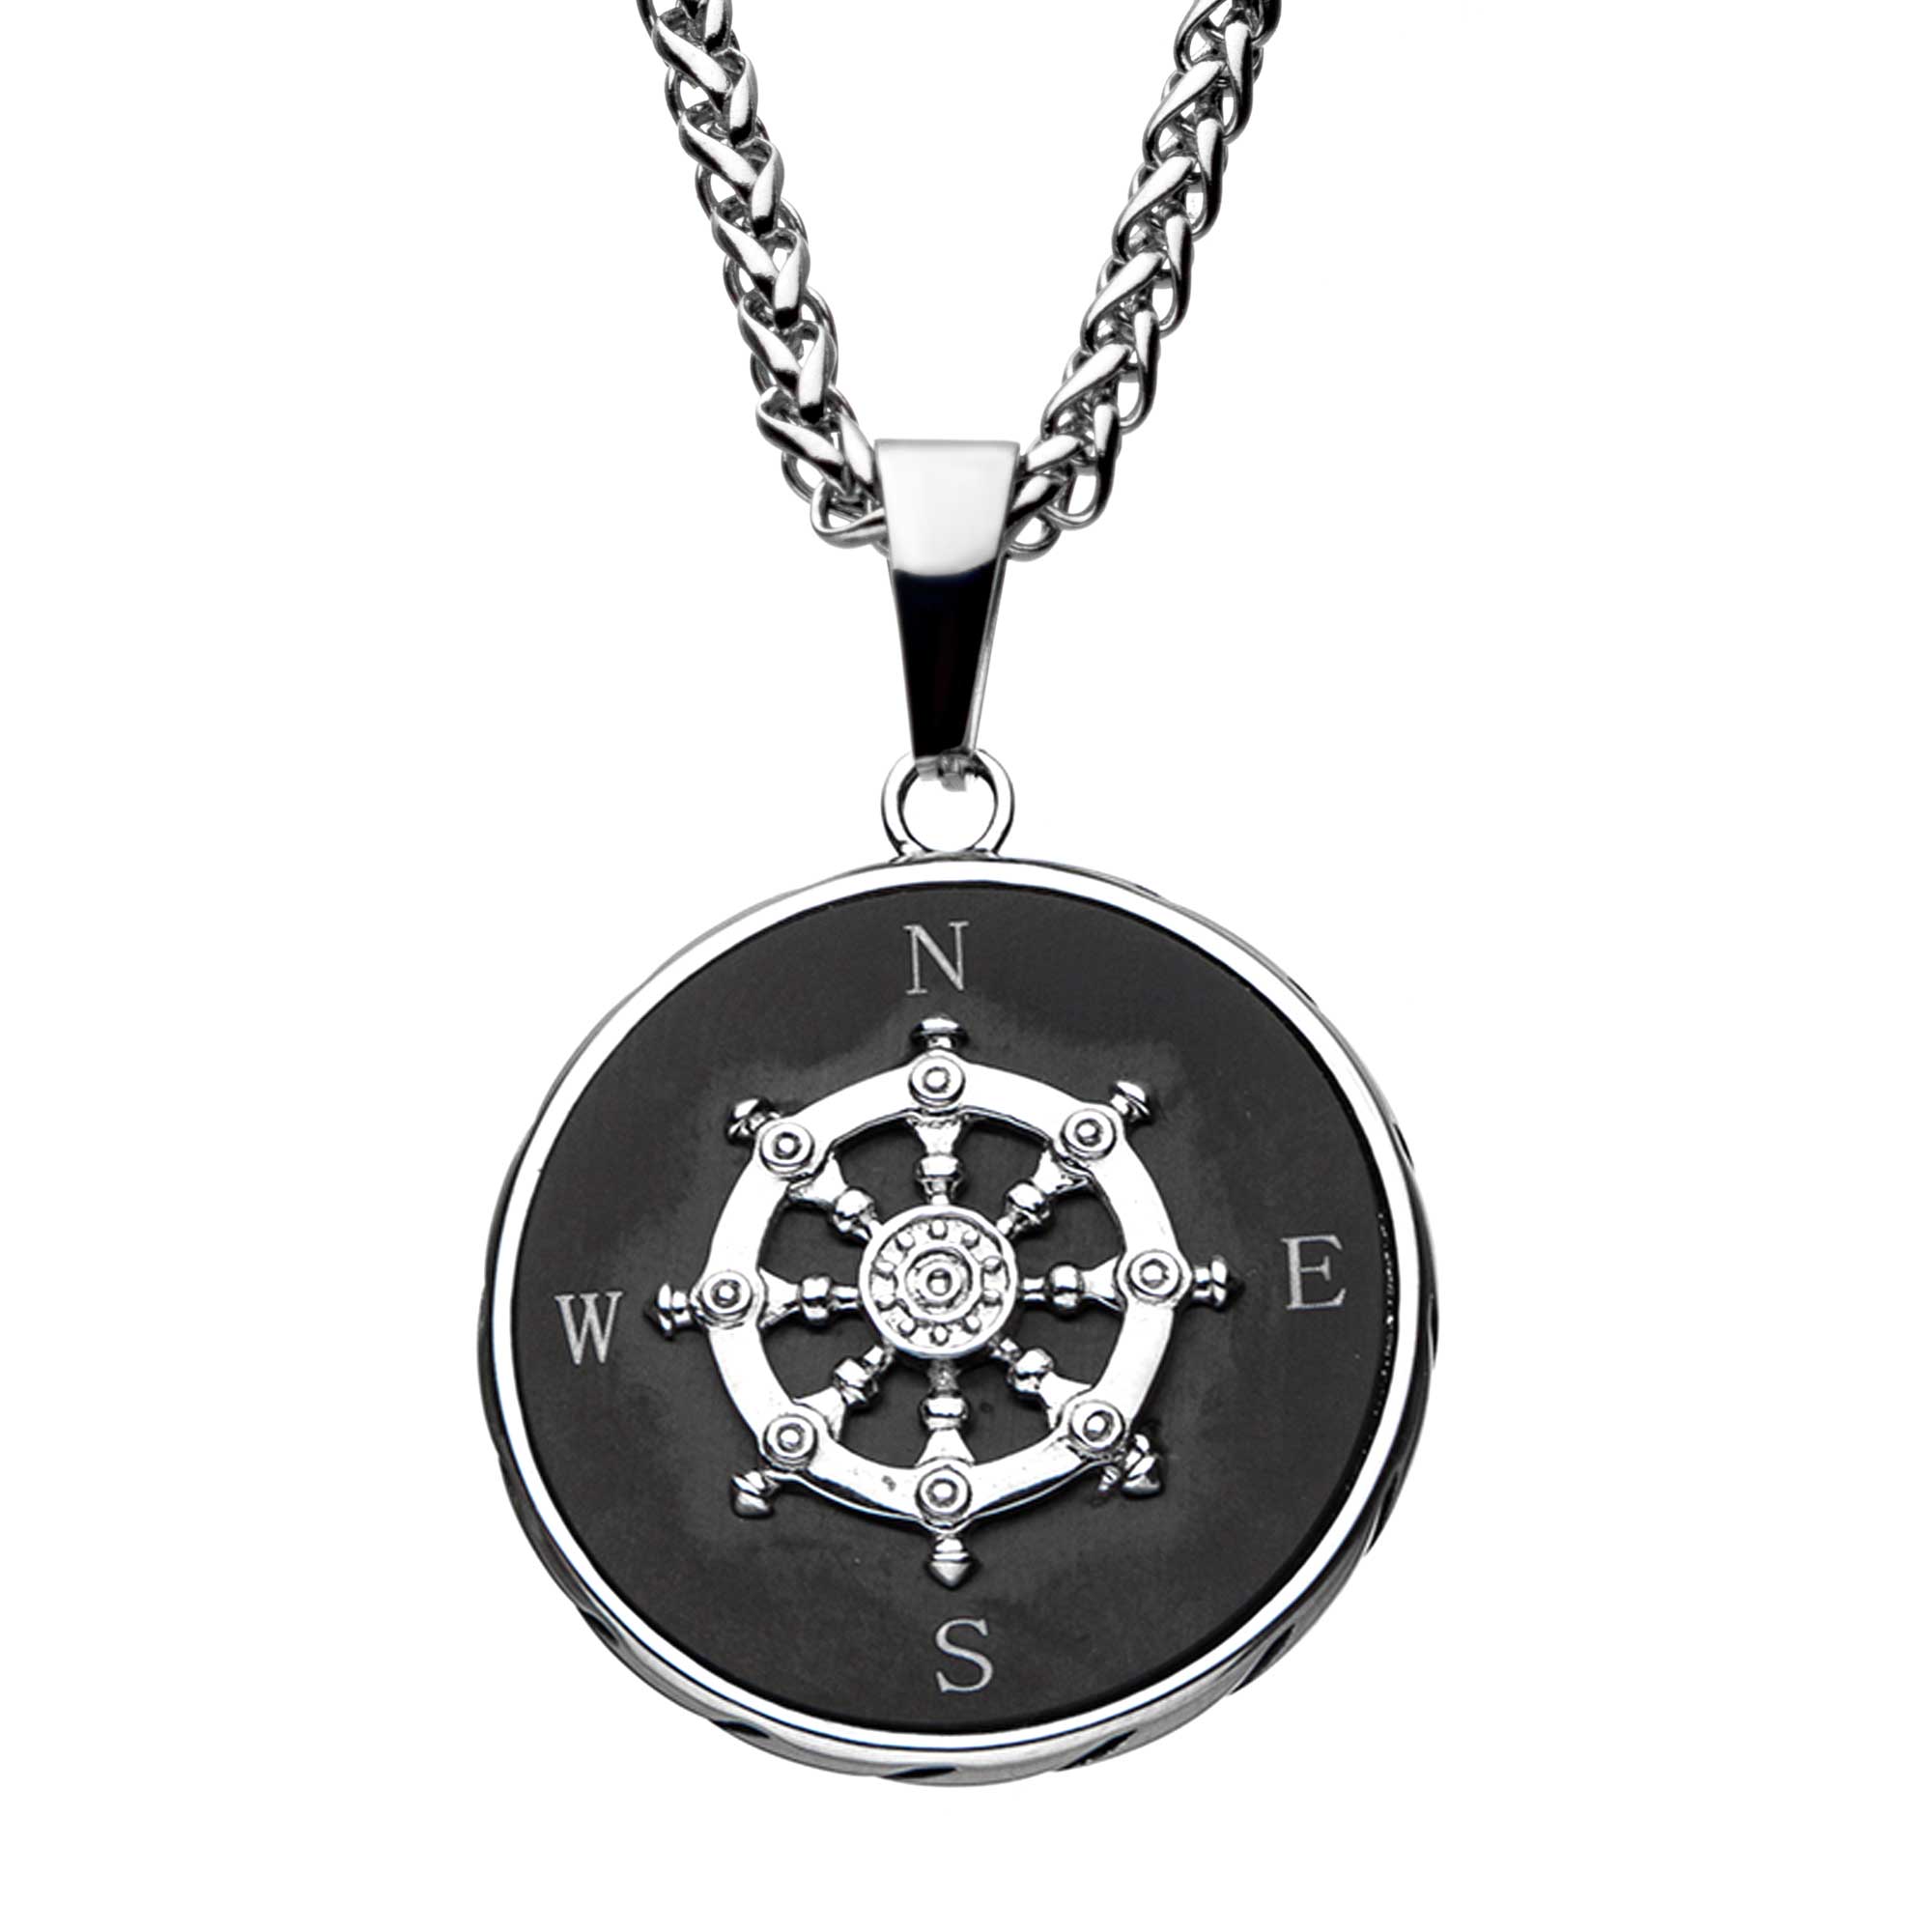 Stainless Steel Black Plated Ship's Wheel Compass Pendant with Chain K. Martin Jeweler Dodge City, KS